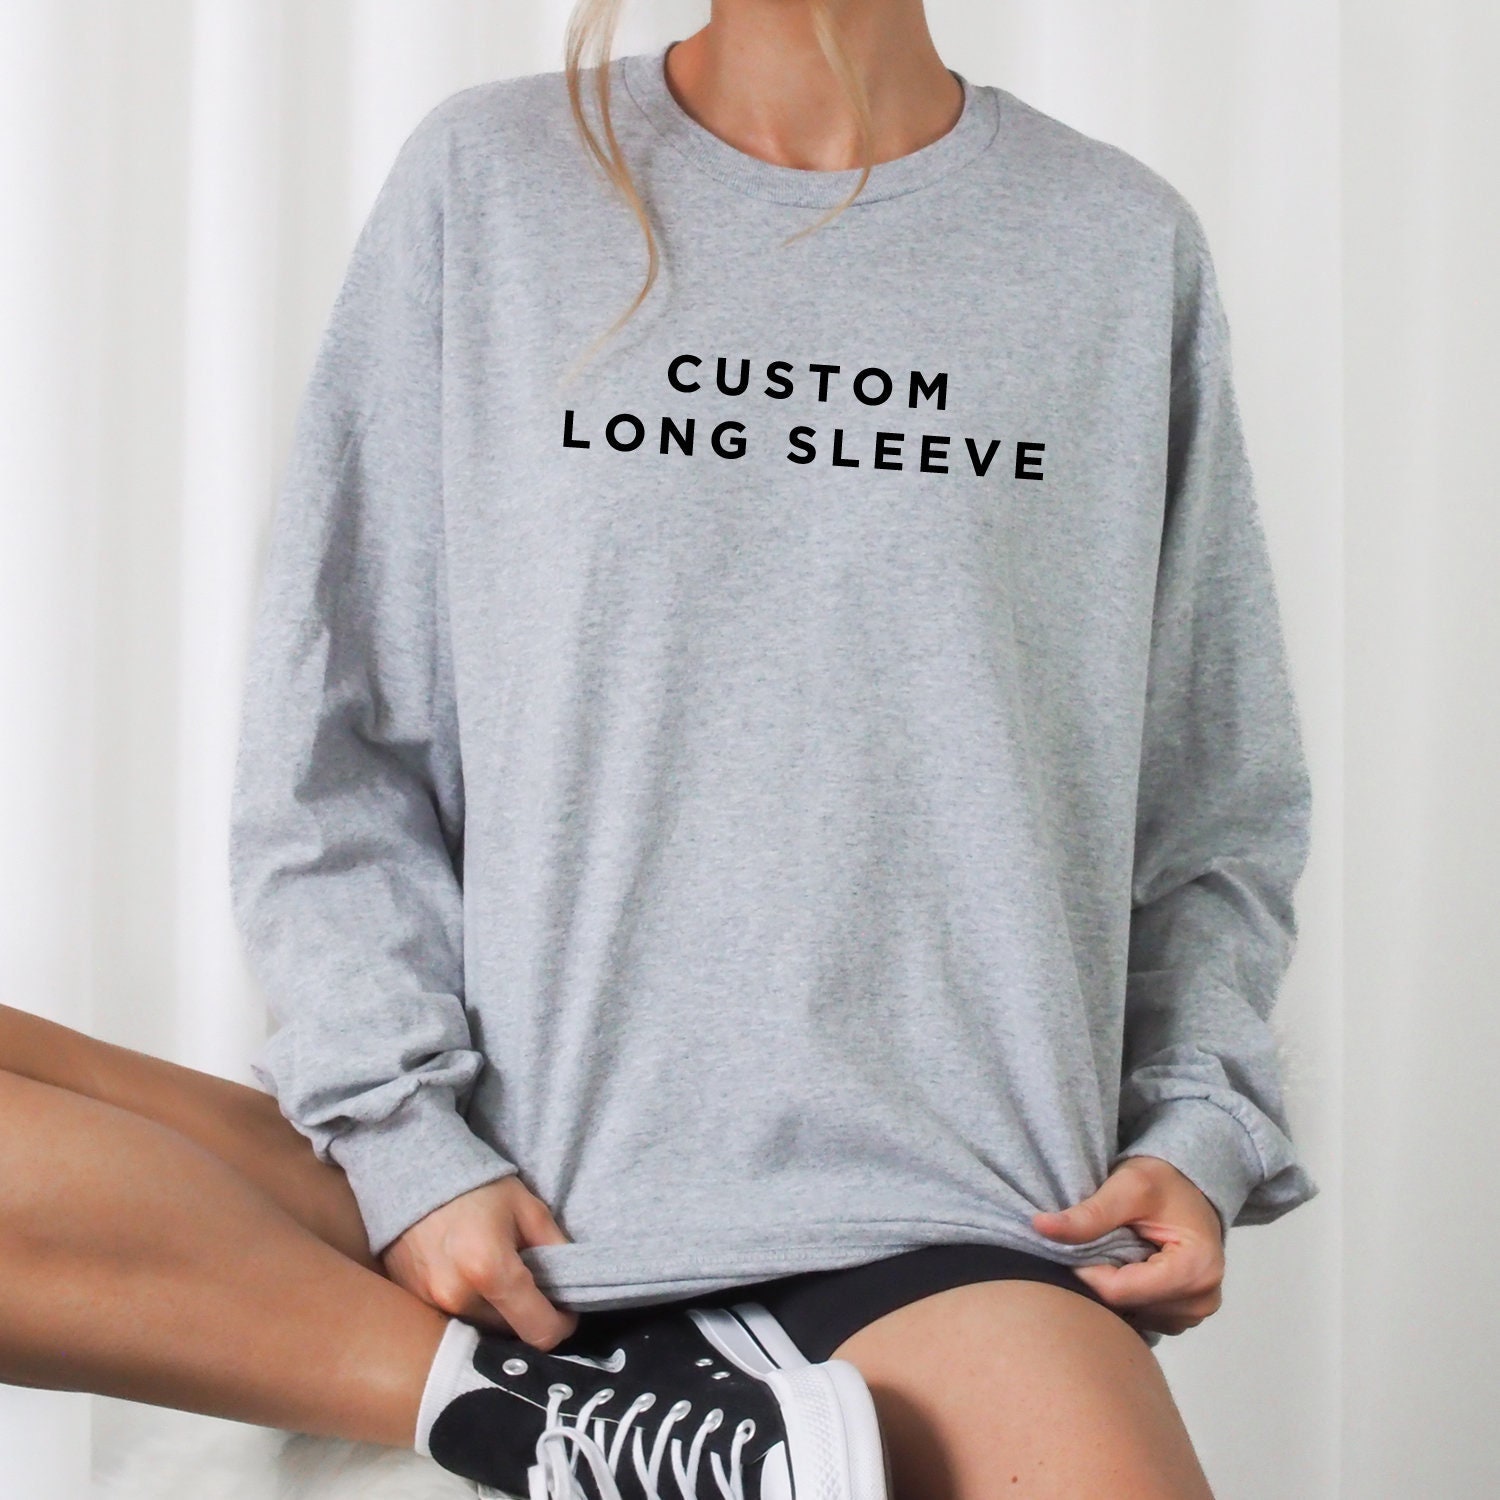 Women's Long Sleeve Printed T with Collar Adaptive Clothing for